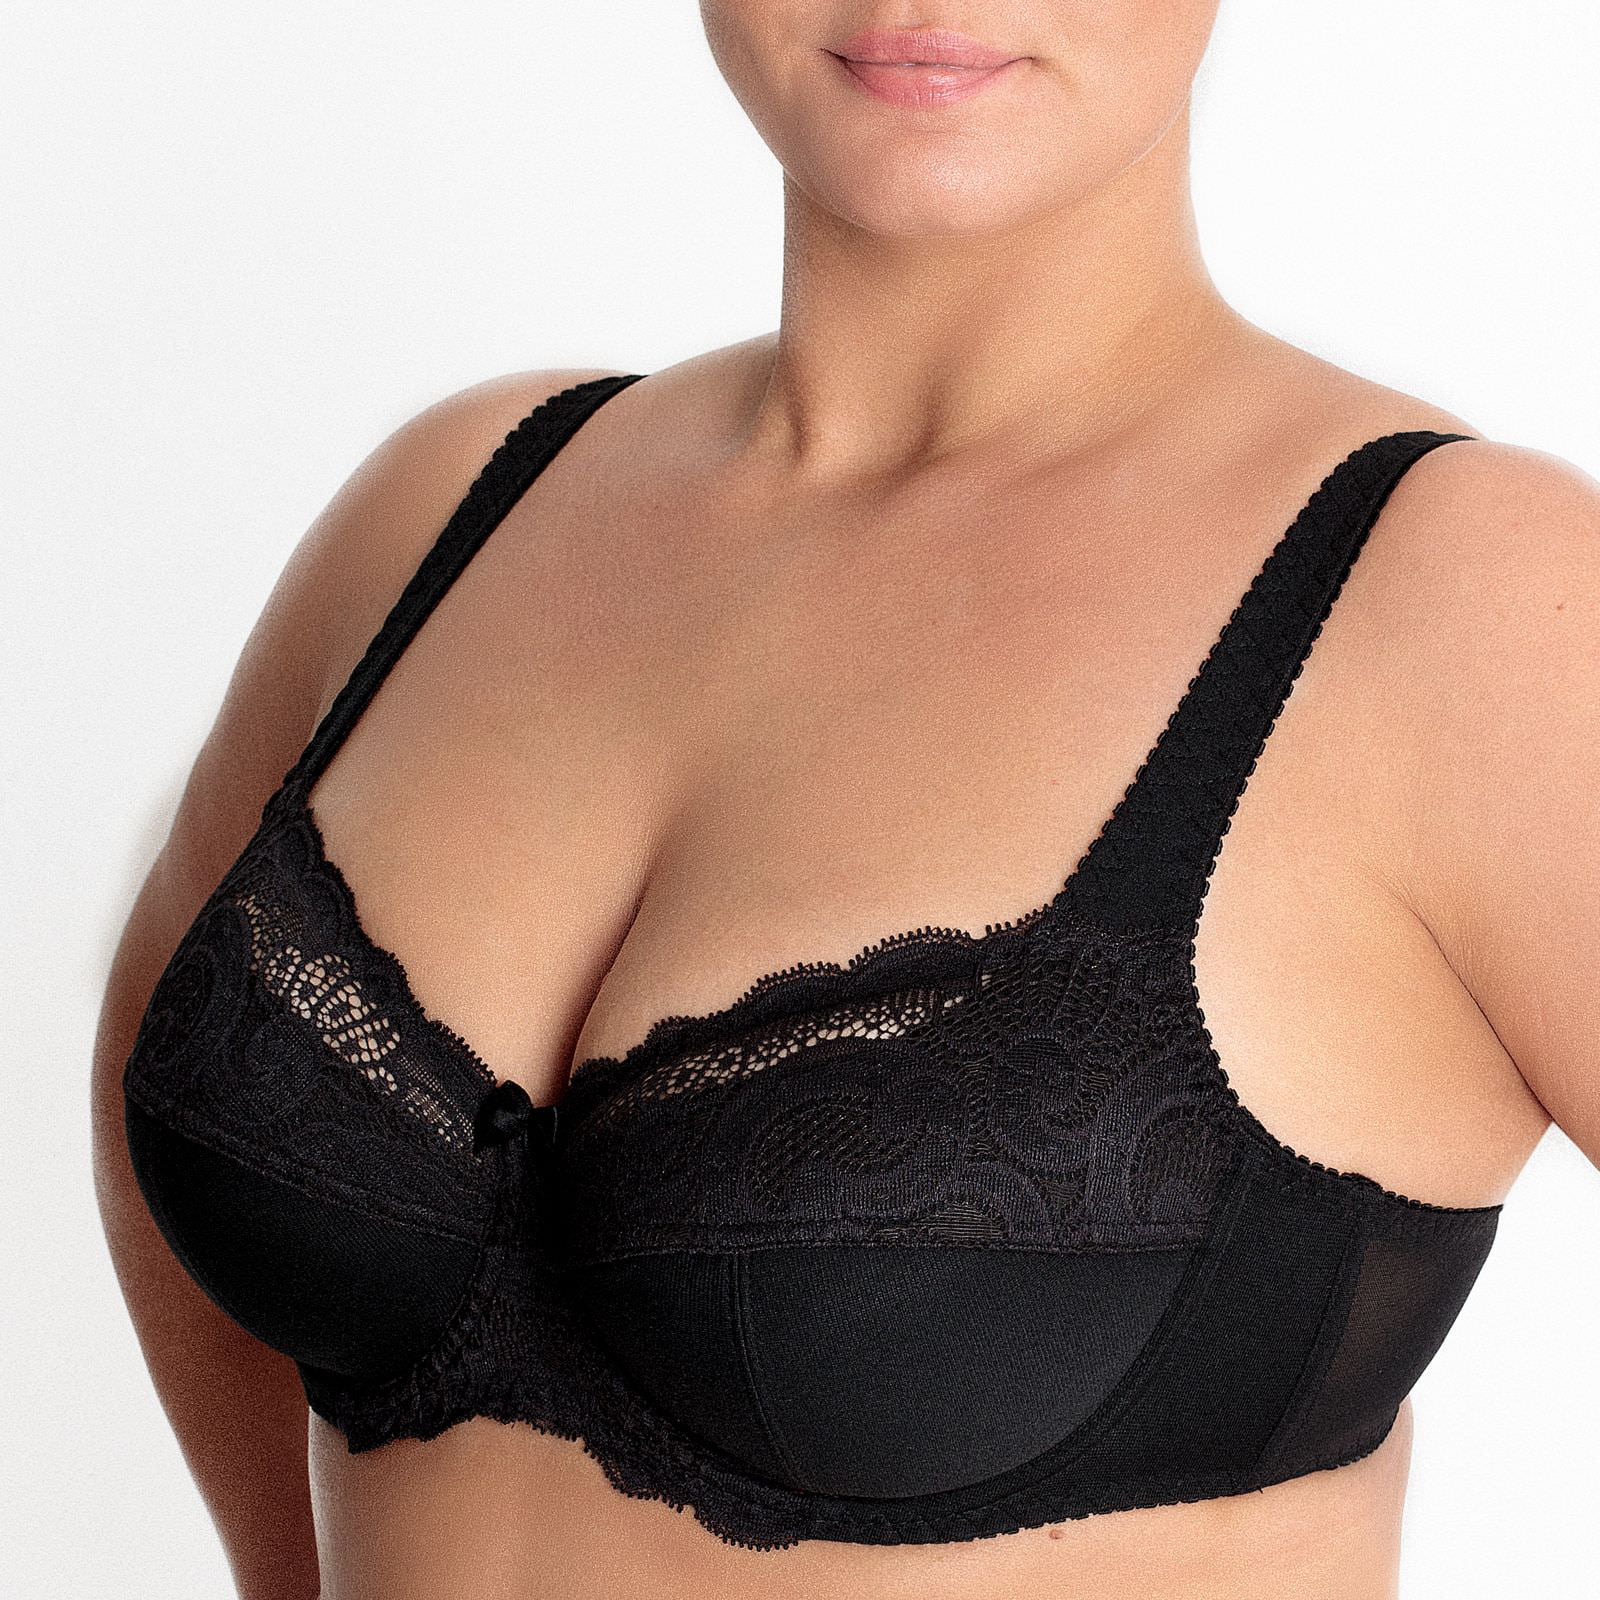 36G Bra Size in DD Cup Sizes Comfort Strap, Front Closure and